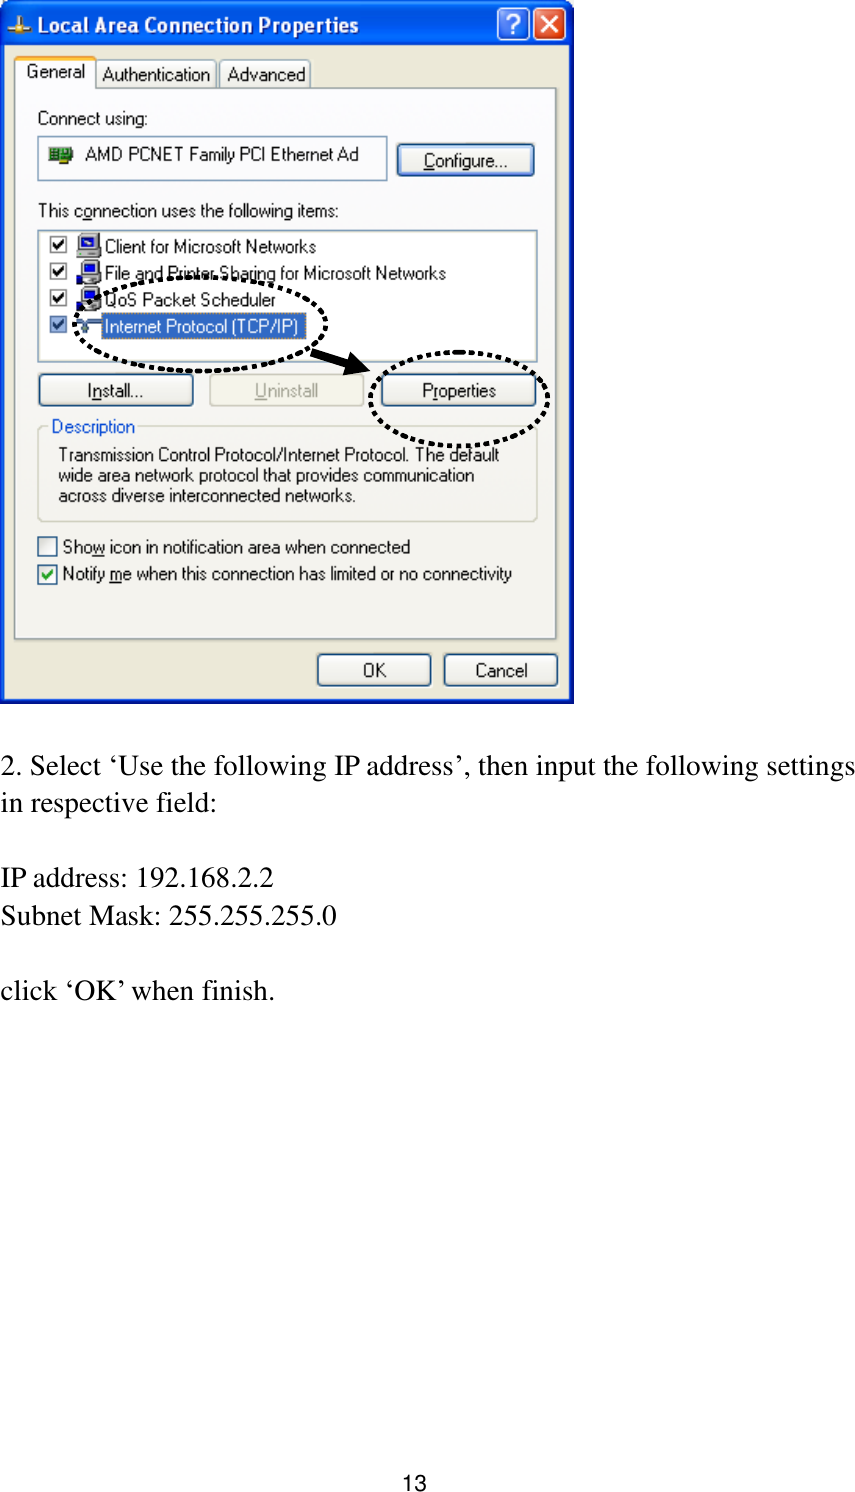 13   2. Select „Use the following IP address‟, then input the following settings in respective field:  IP address: 192.168.2.2 Subnet Mask: 255.255.255.0  click „OK‟ when finish. 